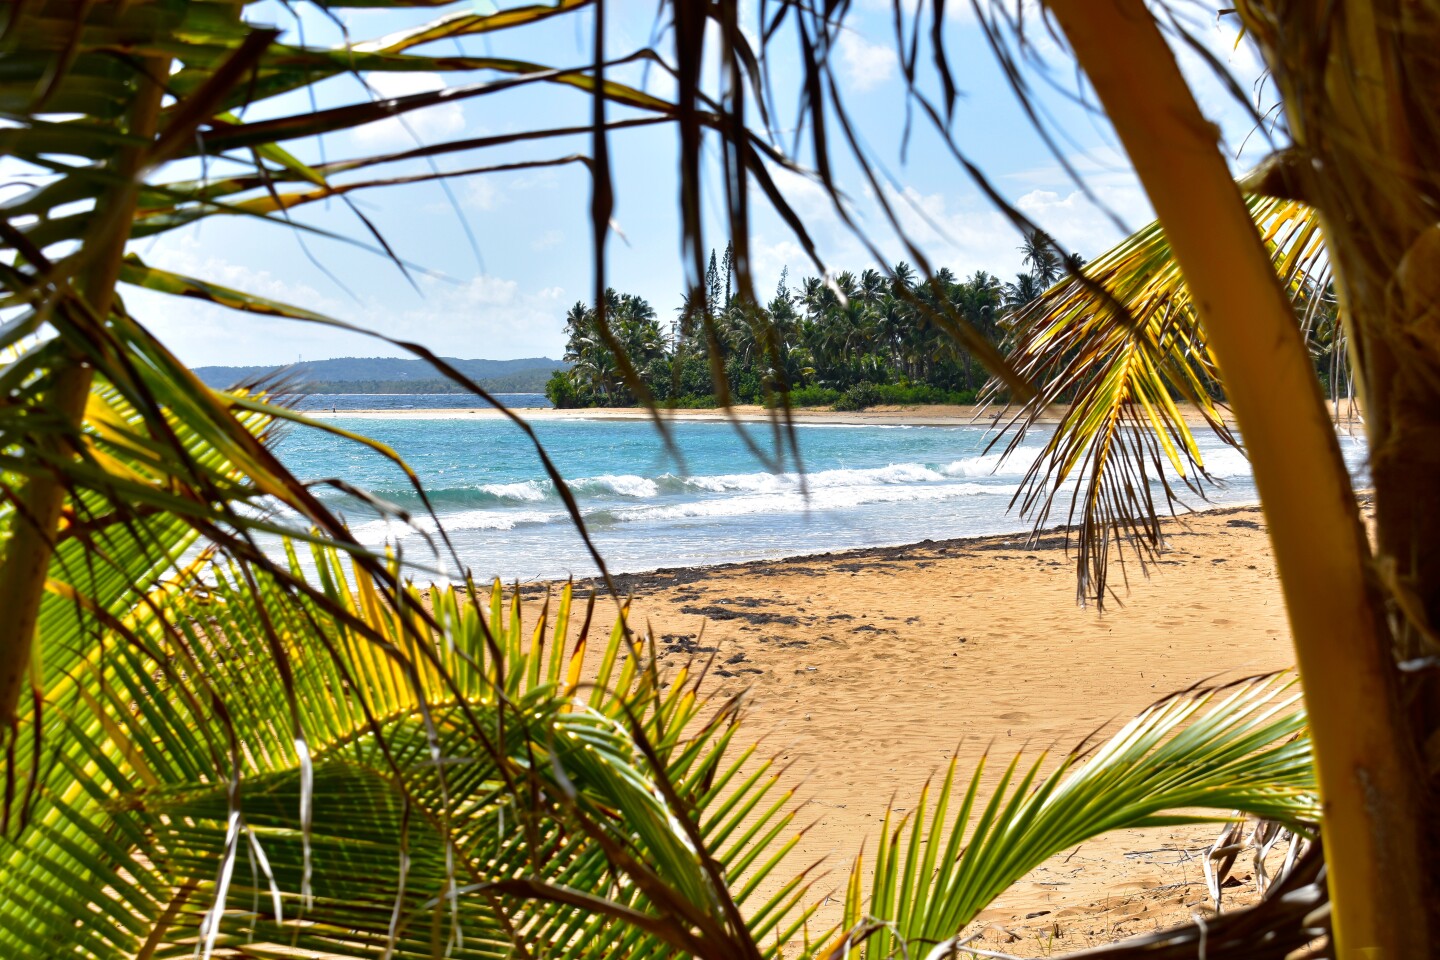 <h2>11. Playa Luquillo</h2> <p><i>Luquillo</i></p> <p>A 45-minute drive east of San Juan is the soft shoreline of Luquillo. The waves here gently lap the beach’s sands, and palm trees provide plenty of shade for an afternoon nap. Weekdays are your best bet for a crowdless beach experience, but the weekends come with their own perks if you want to step into local culture. The town’s <i>kioskos</i> come alive on the weekends and are only a 20-minute walk south of the beach. This group of 60 or so kiosks offer <a class="Link" href="https://www.afar.com/magazine/iconic-puerto-rico-foods-and-where-to-try-them">local foods</a> like <i>alcapurrias</i> and <i>empanadilla</i>s, often with live music come nighttime. </p> <p><i>This article was originally published in 2021 and most recently updated on October 23, 2023, to include current information.</i></p>